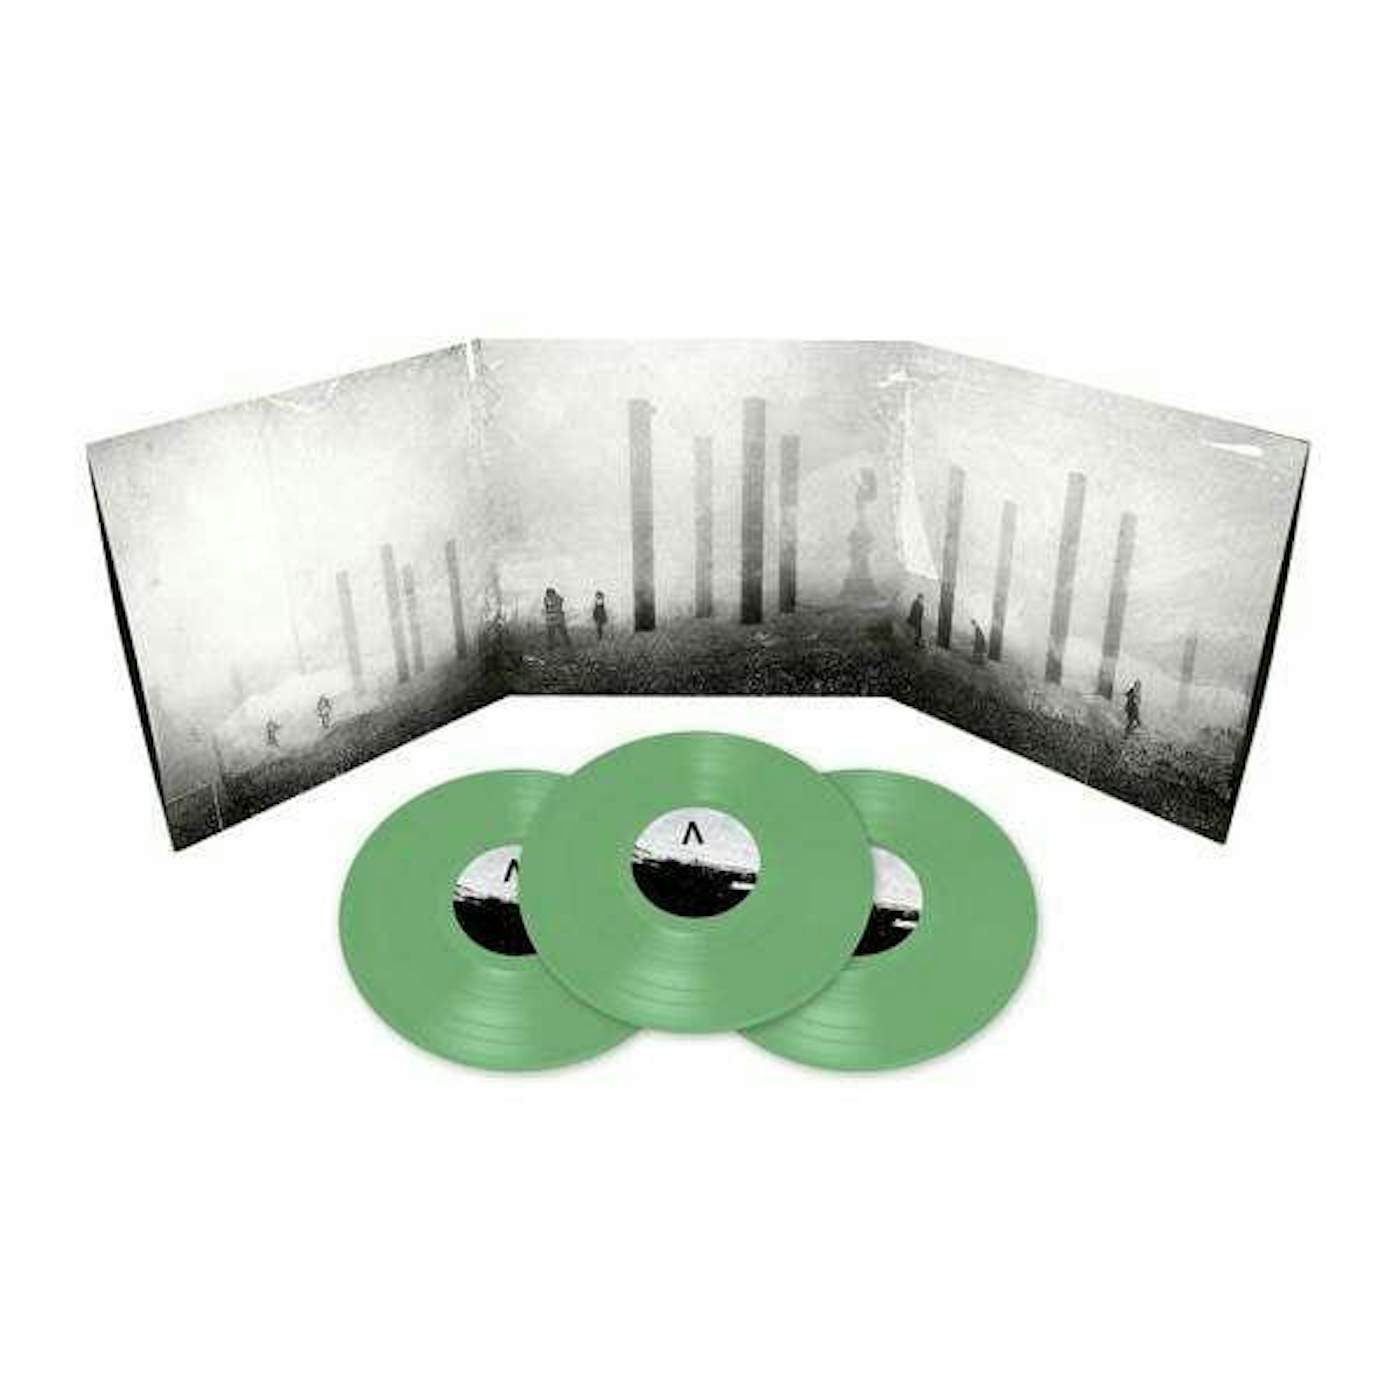 Archive CALL TO ARMS & ANGELS (3 LP GREEN VINYL)